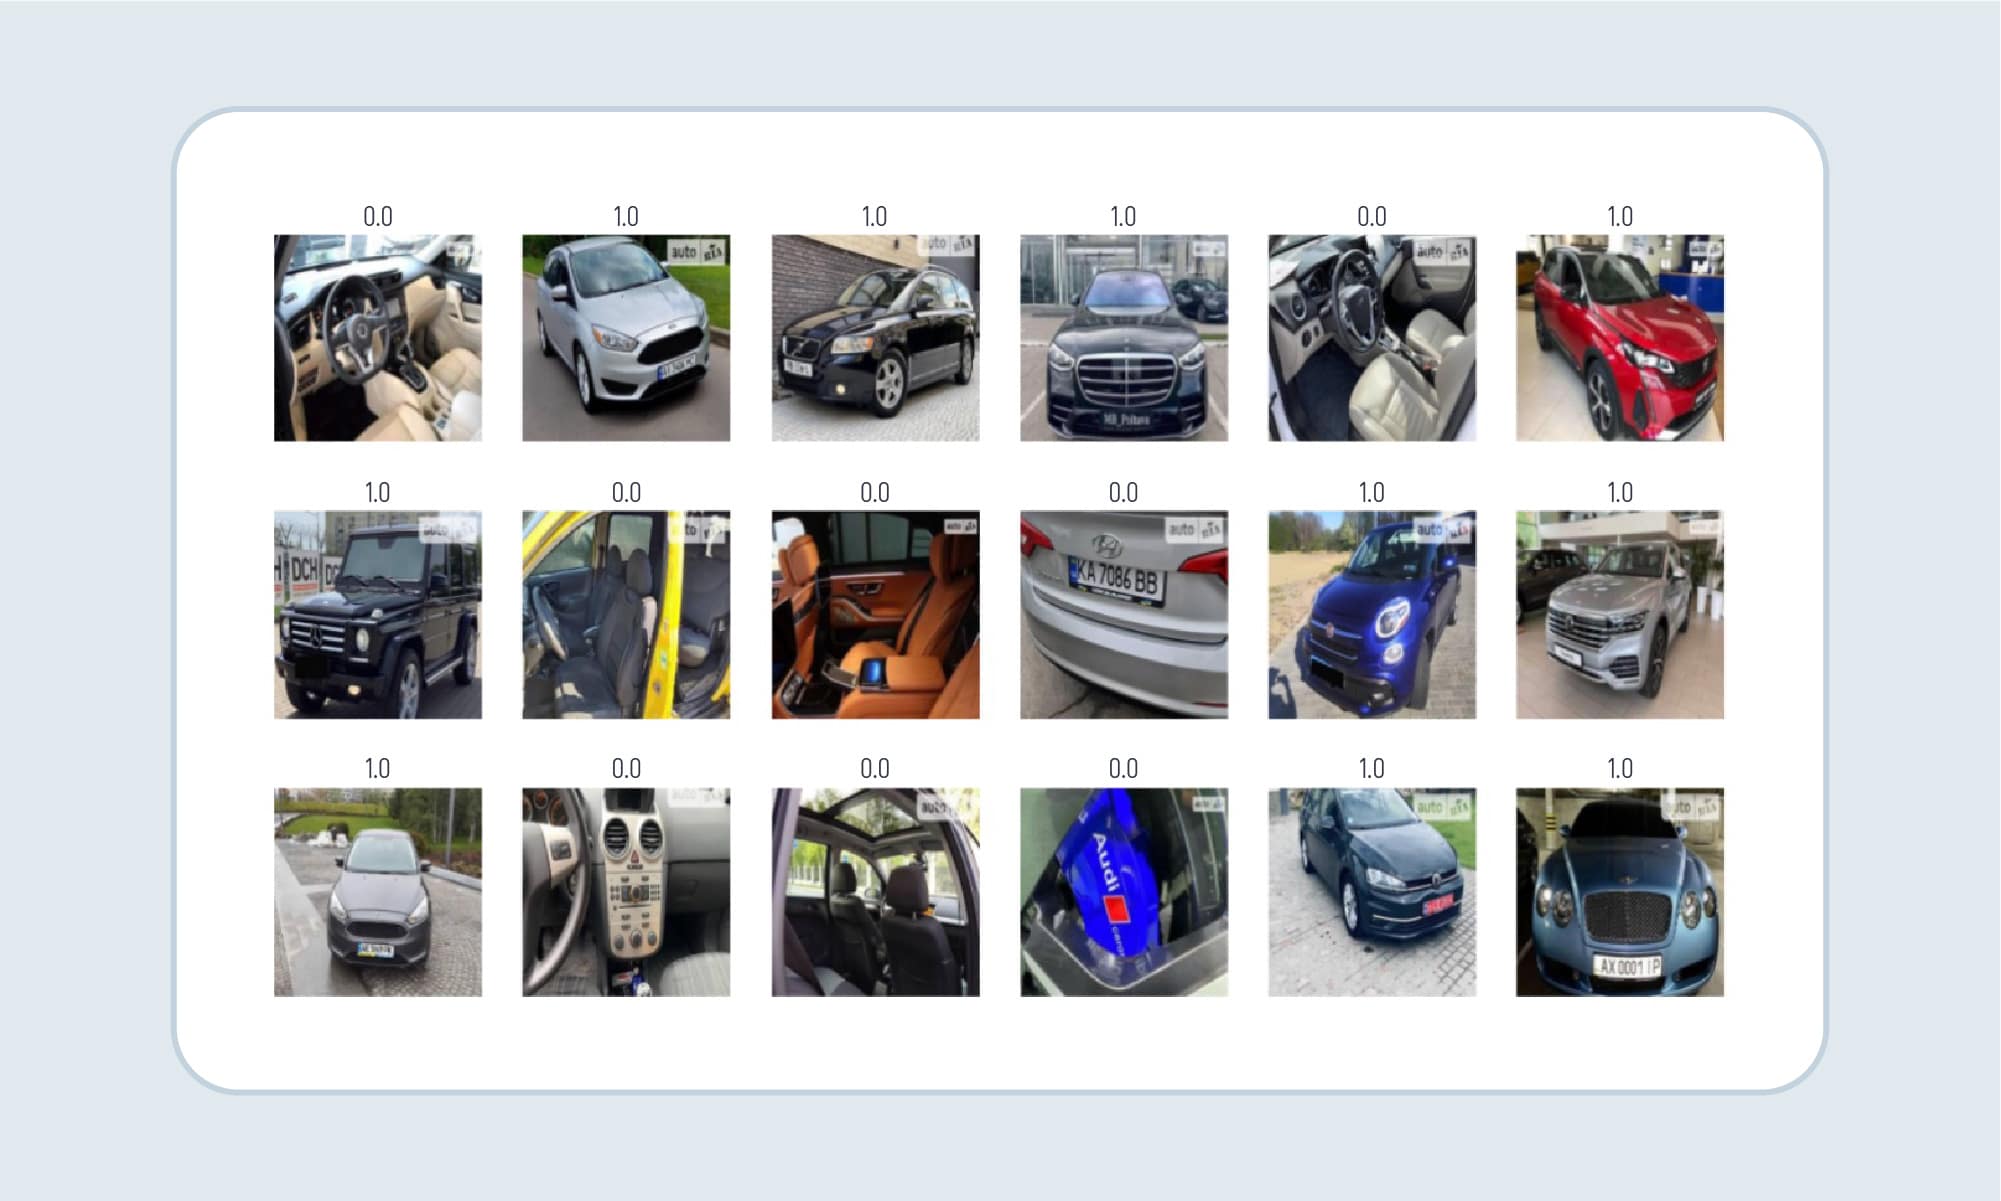 images of cars that were selected in the process of filtering out images from the dataset that are not car exterior with pre-trained VGG16 model